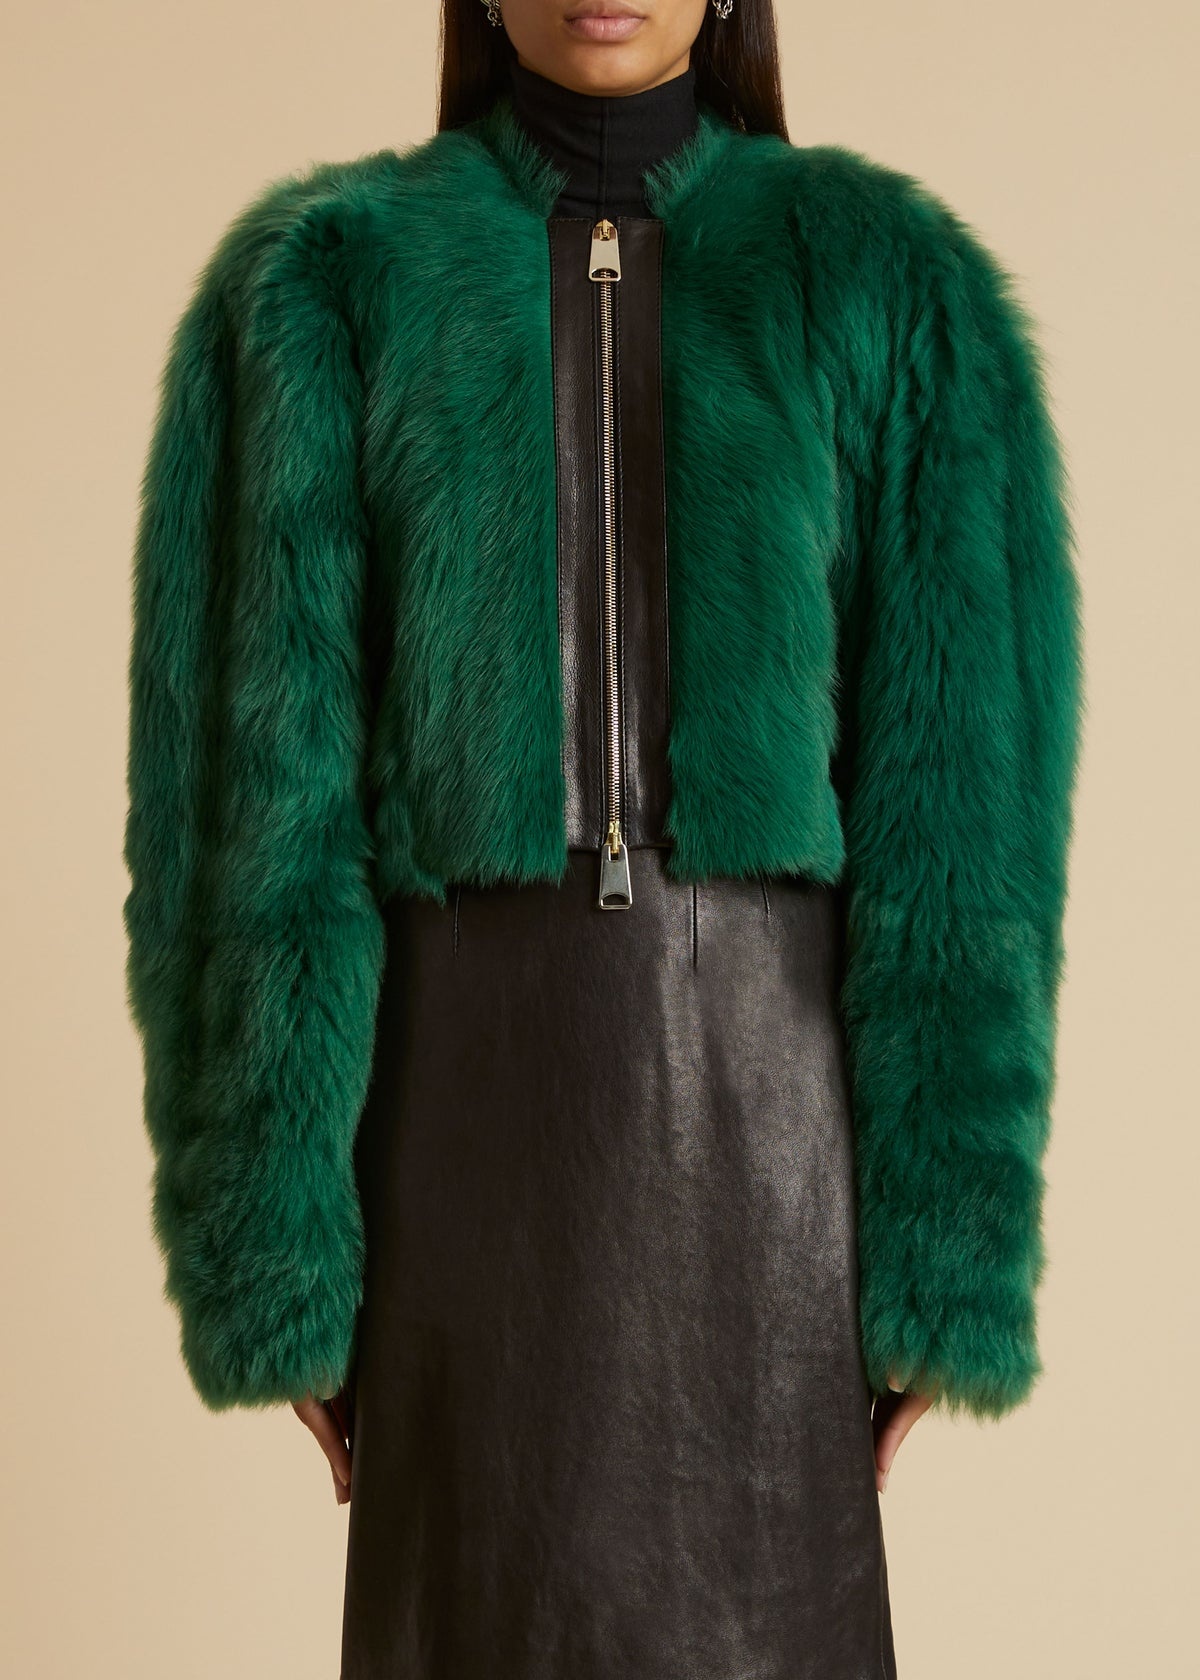 The Gracell Jacket in Forest Green Shearling - 2